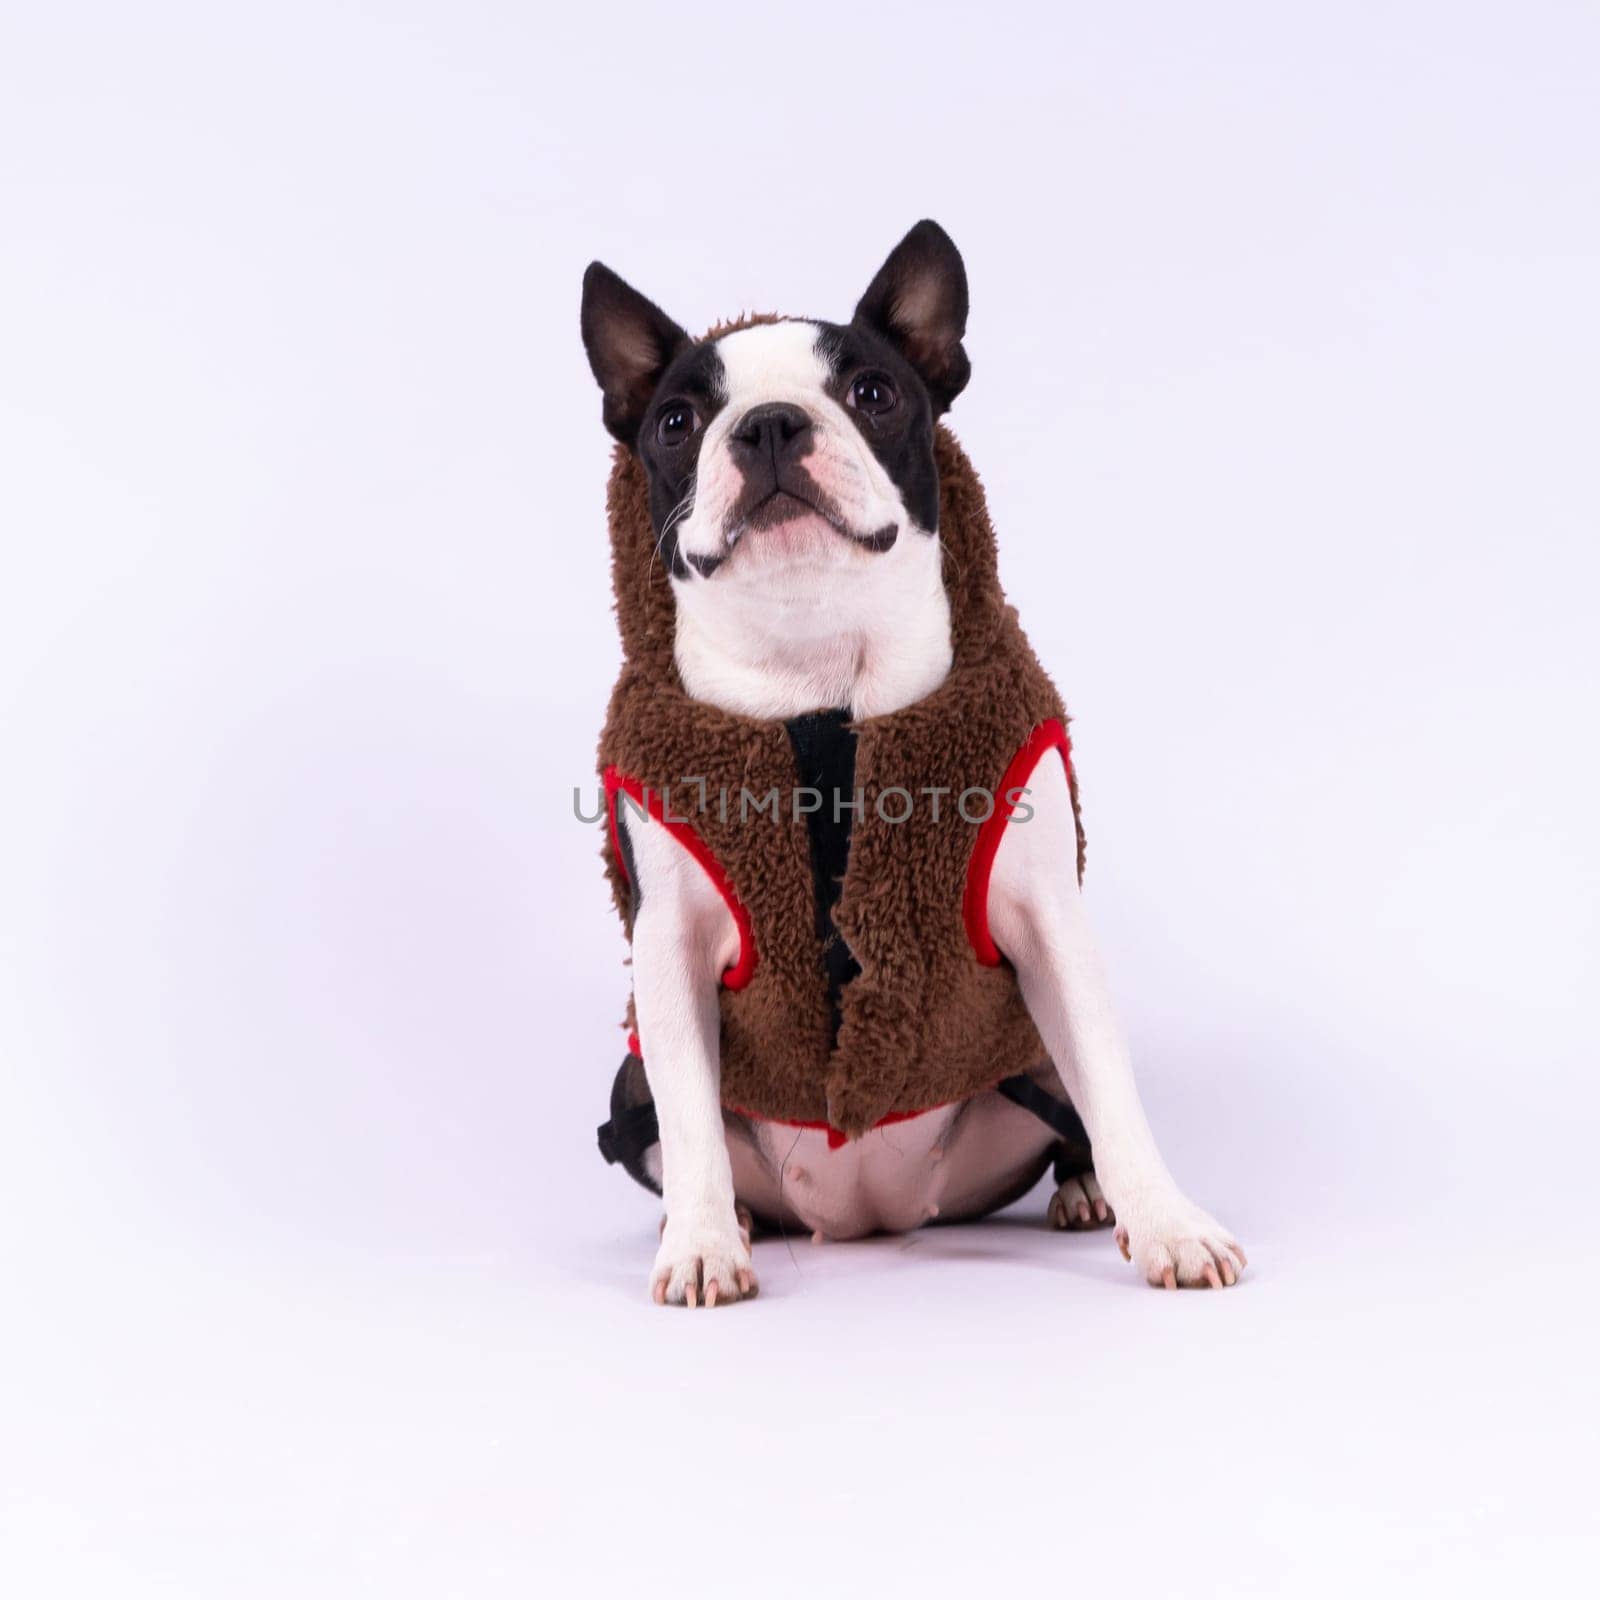 Boston Terrier. Portrait of a dog on white dark background and chair.